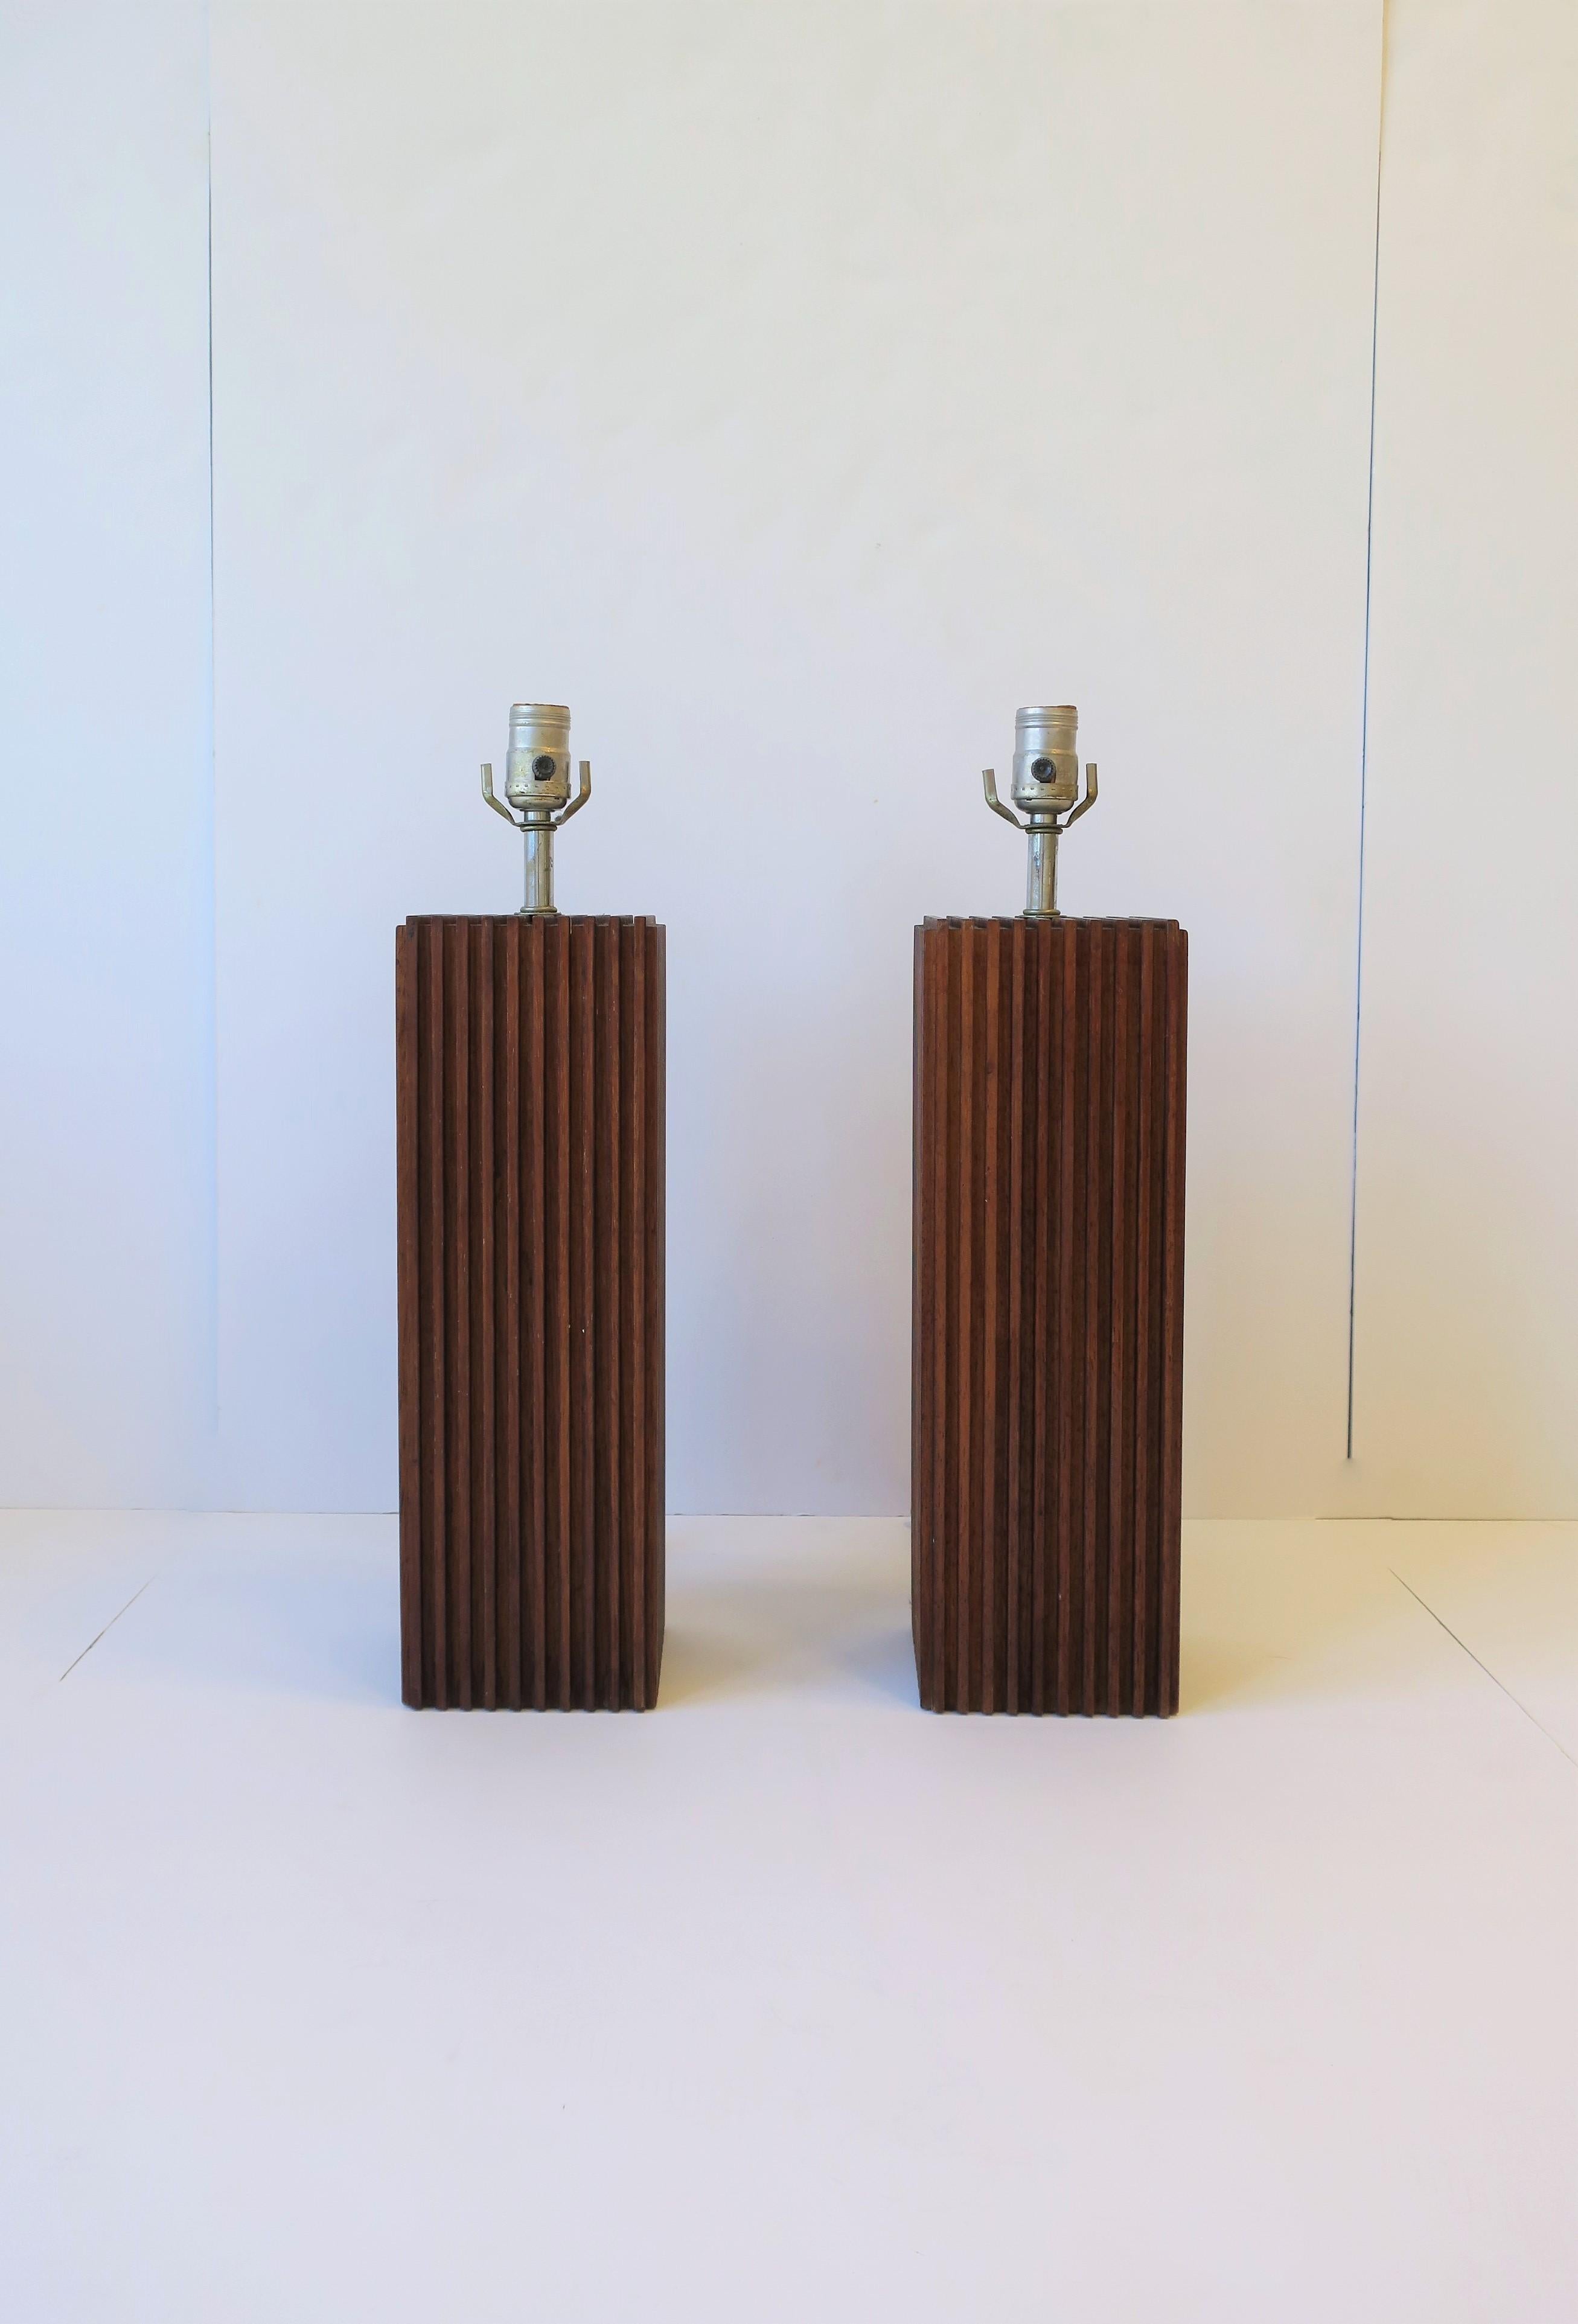 A very beautiful, substantial, and rich pair of 1970s Modern and Art Deco style wood table lamps with a vertical linear design, circa 1970s.

Measurements: 
21